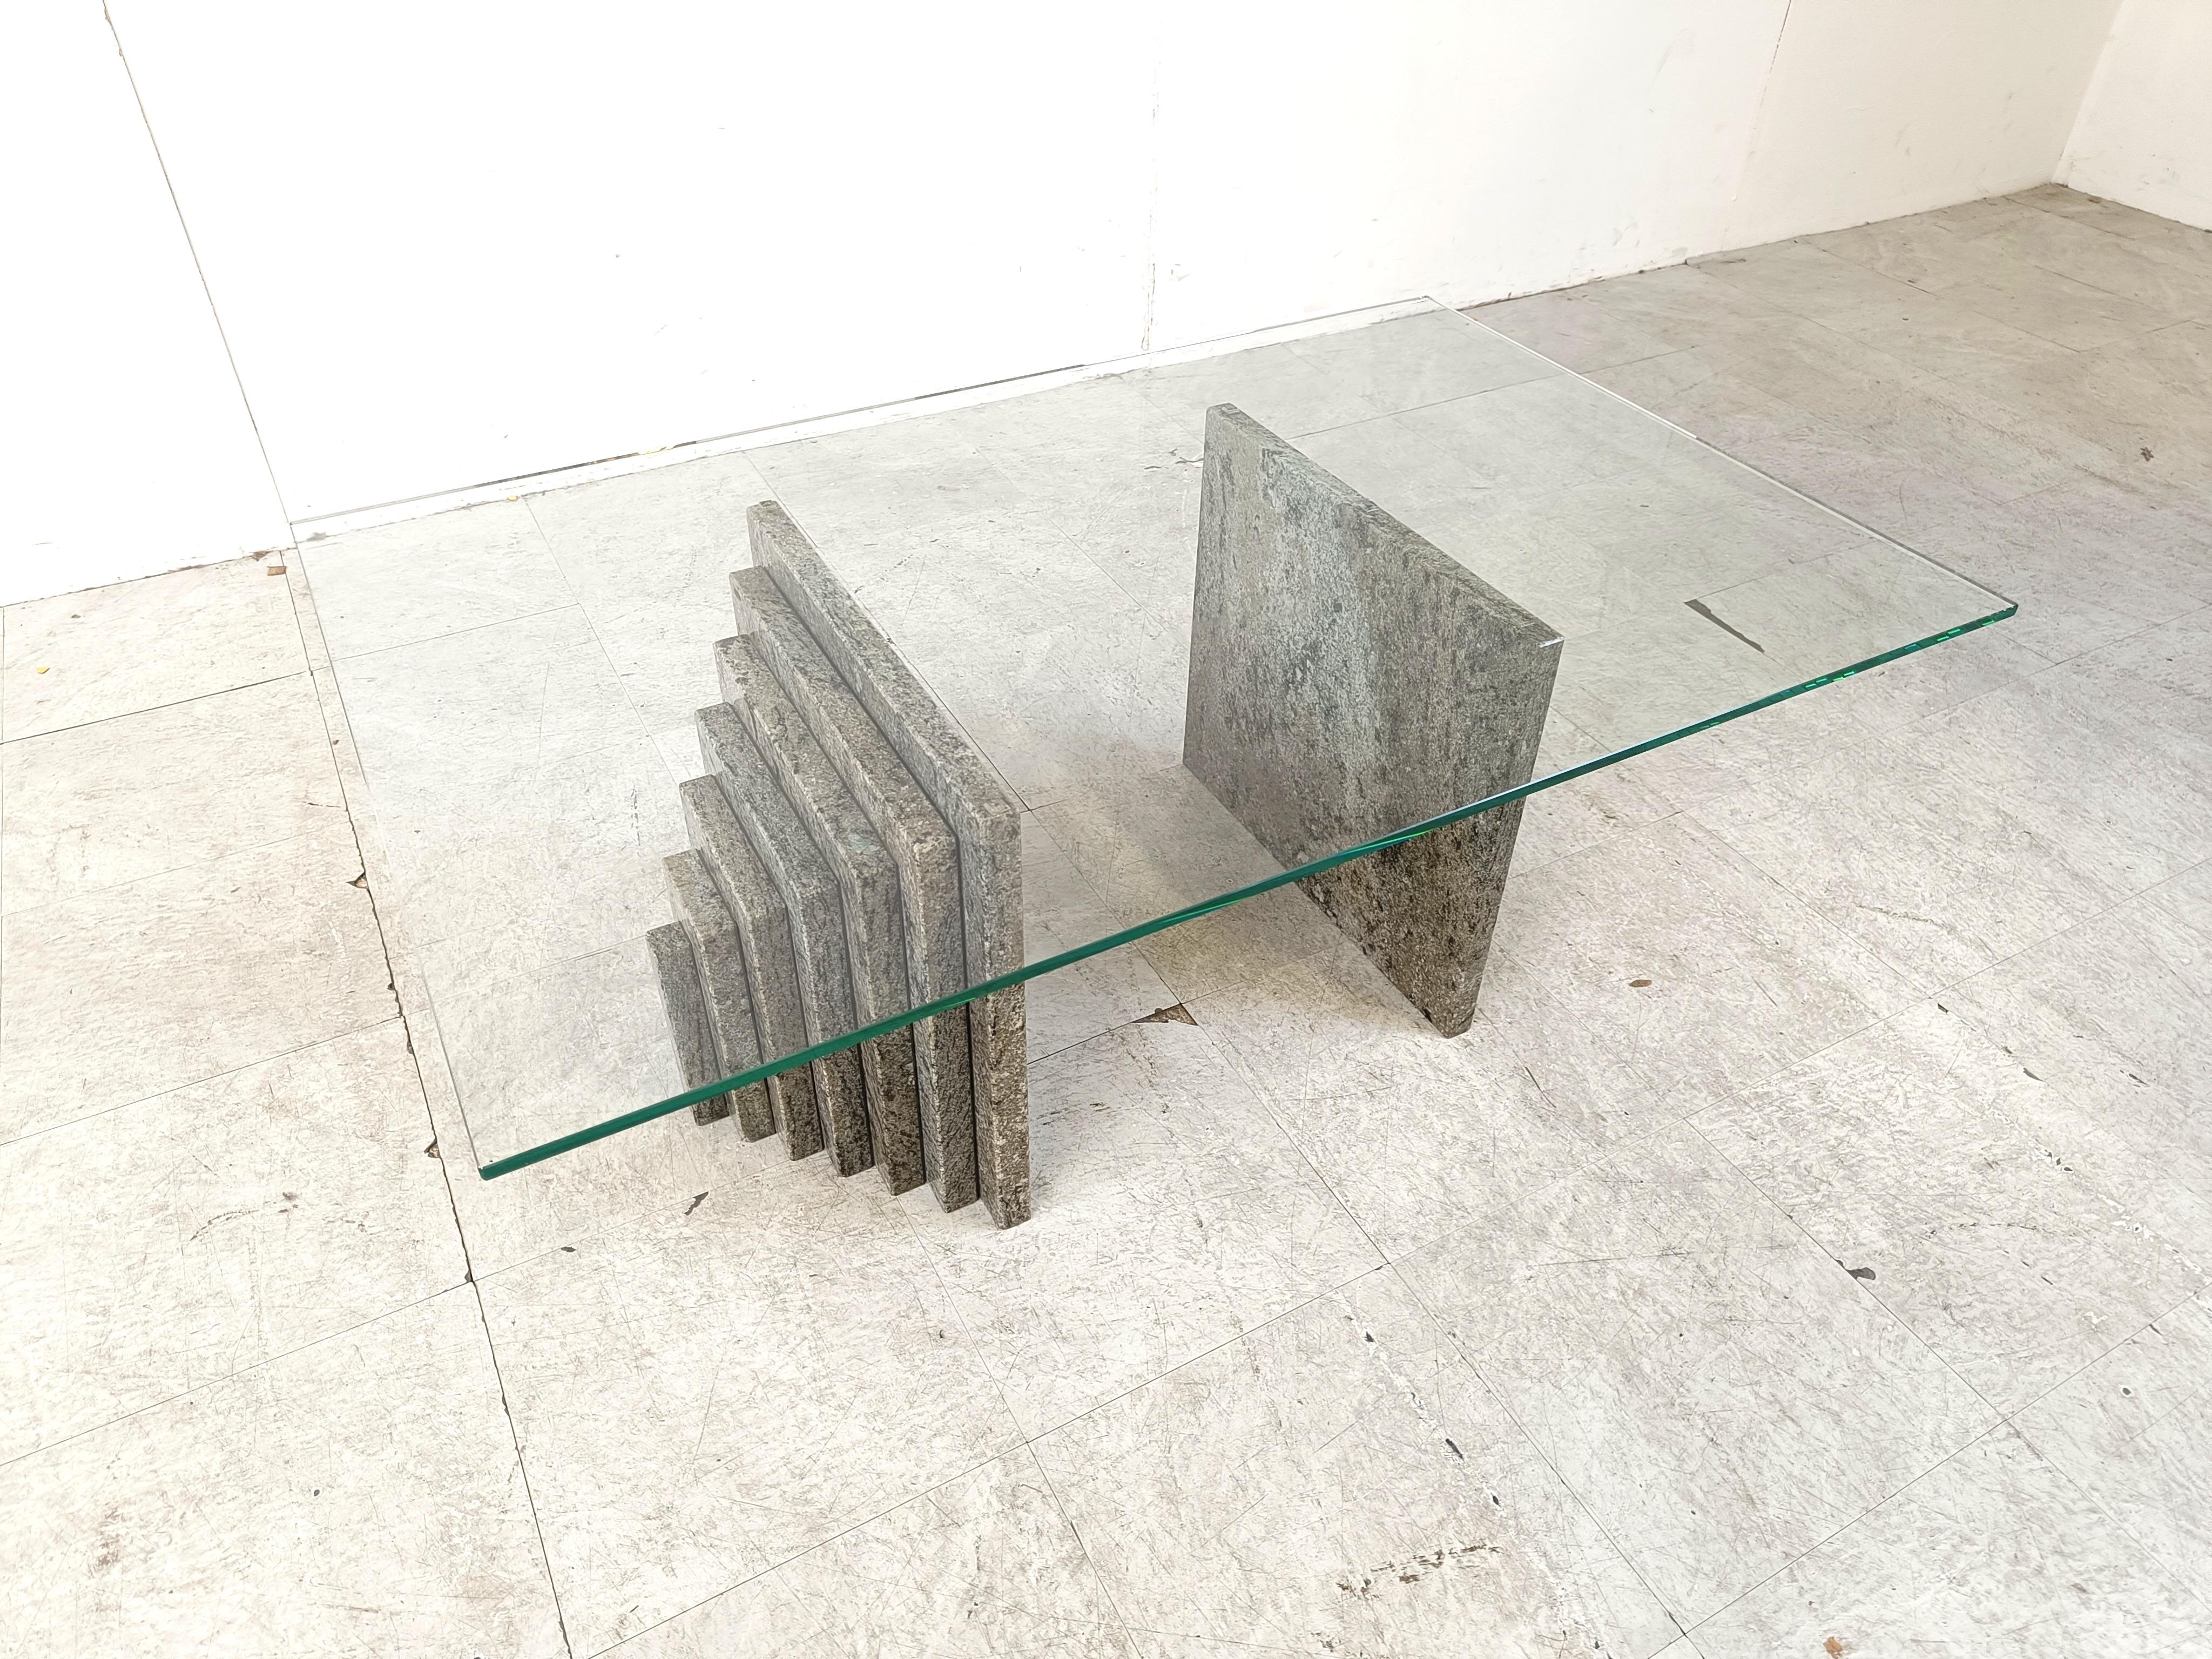 Vintage coffee table with a clear glass rectangular top and stepped granite stone bases.

Very n ice, timeless design with beautiful natural granite.

1980s - Italy

Dimensions: 
Height:  40cm
Width: 110cm
Depth: 70cm

Ref.: 655546